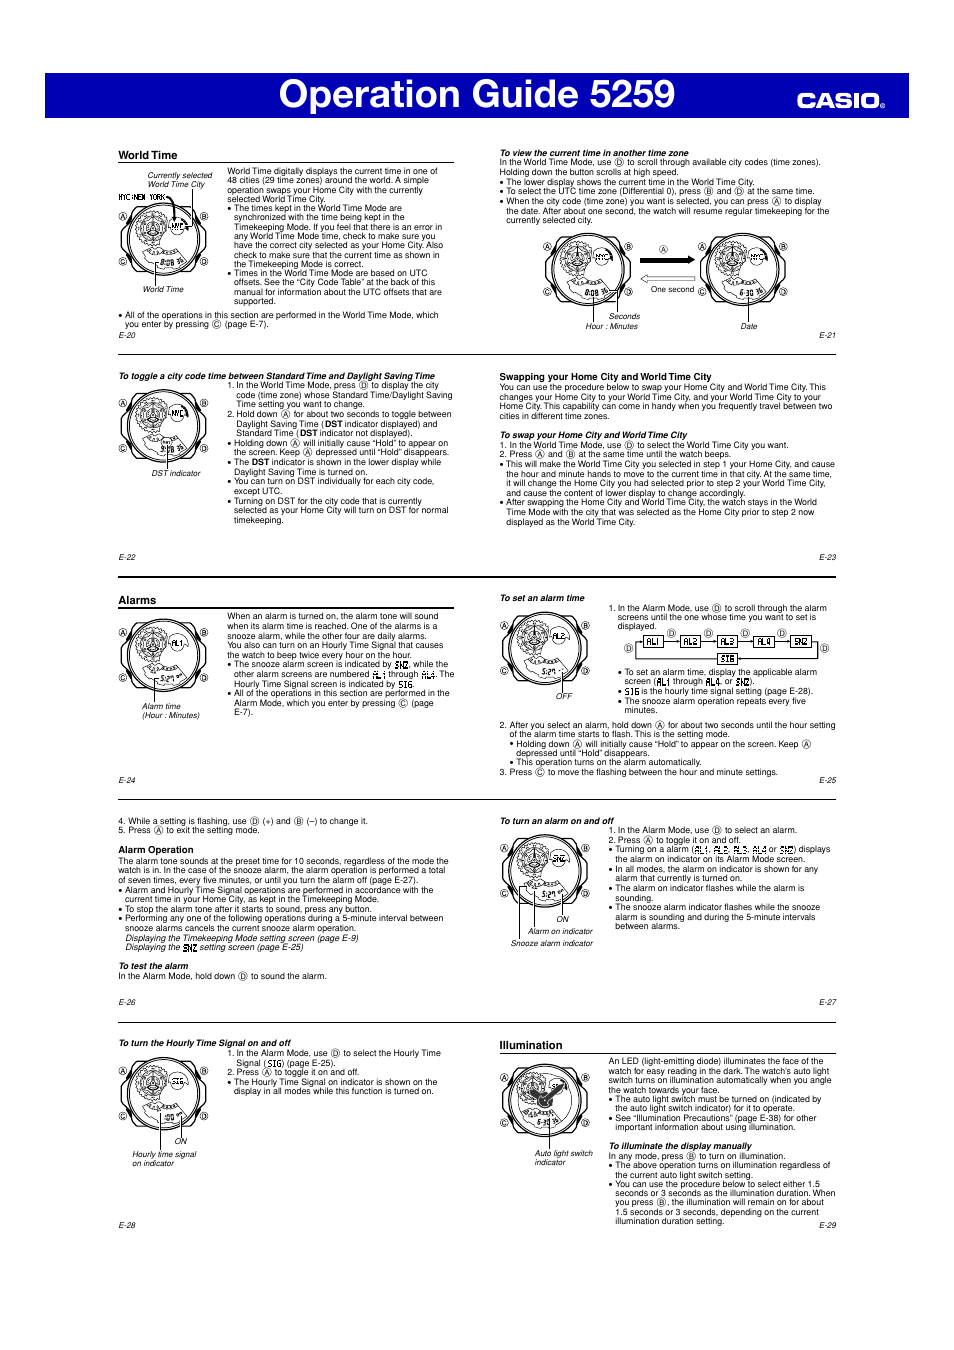 Operation guide 5259 | G-Shock GA-300 User Manual | Page 3 / 5